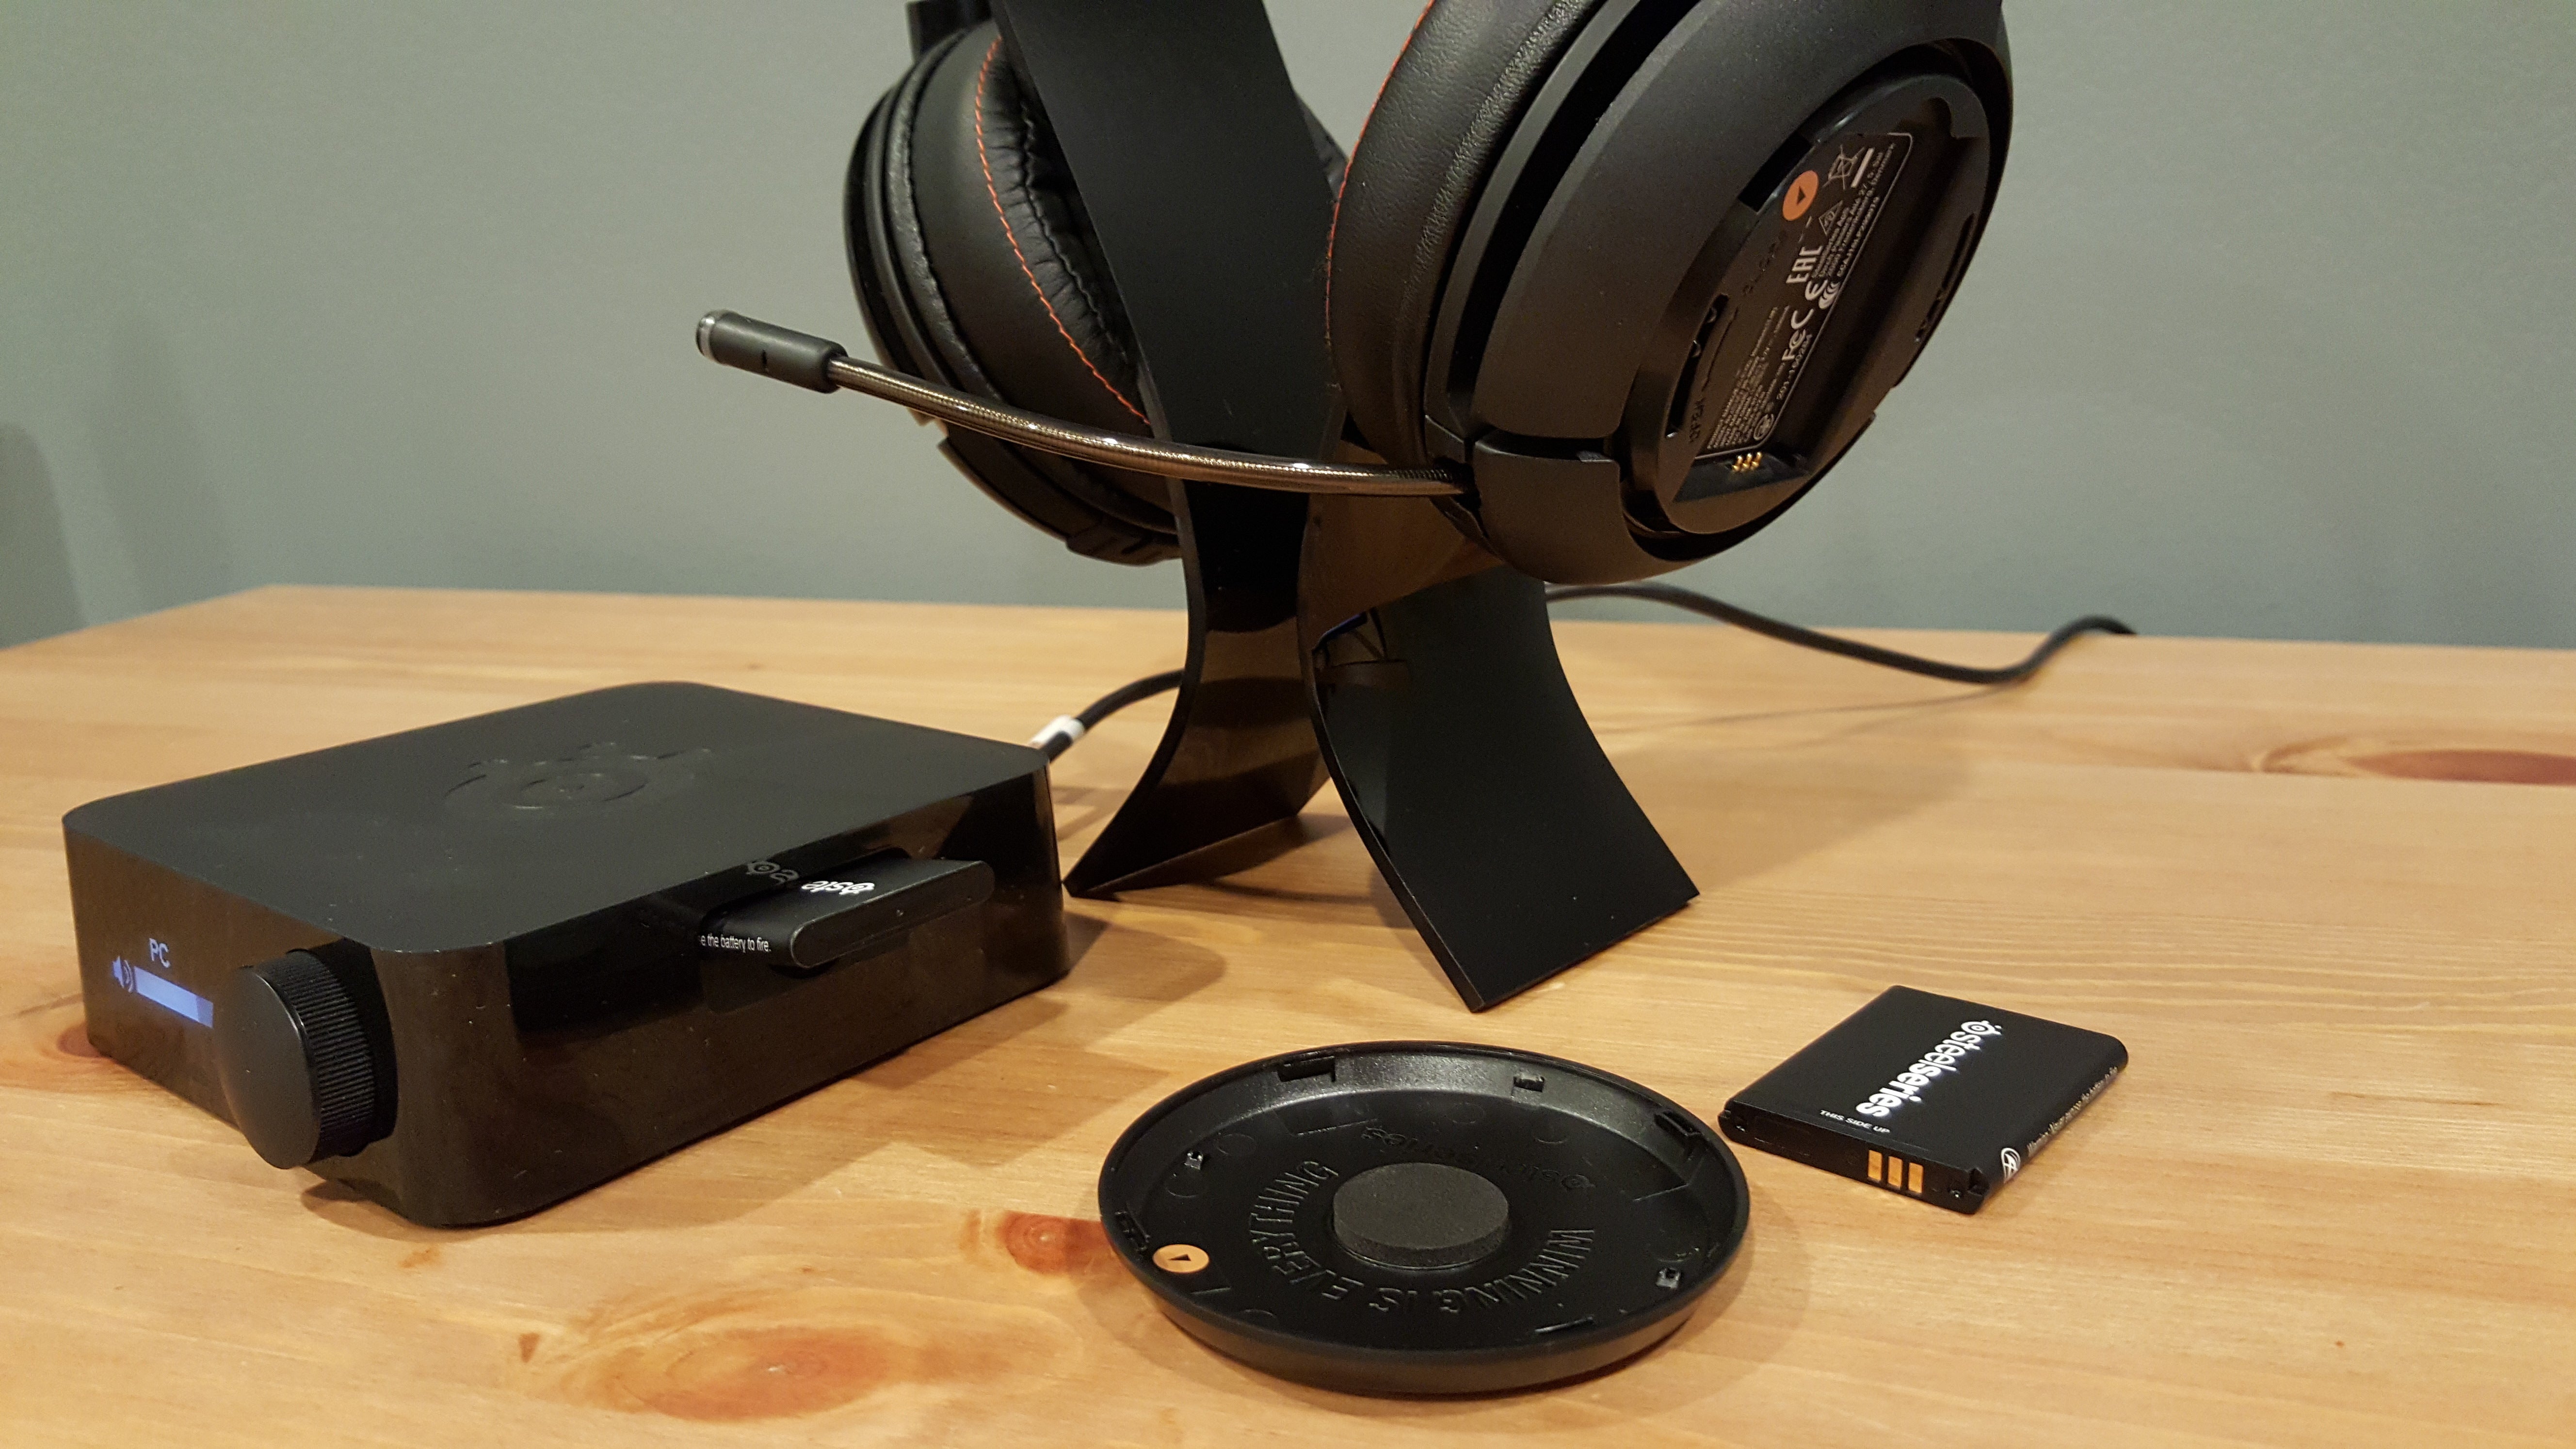 SteelSeries Siberia review: A (and optional) upgrade to the old Siberia 800 | PCWorld